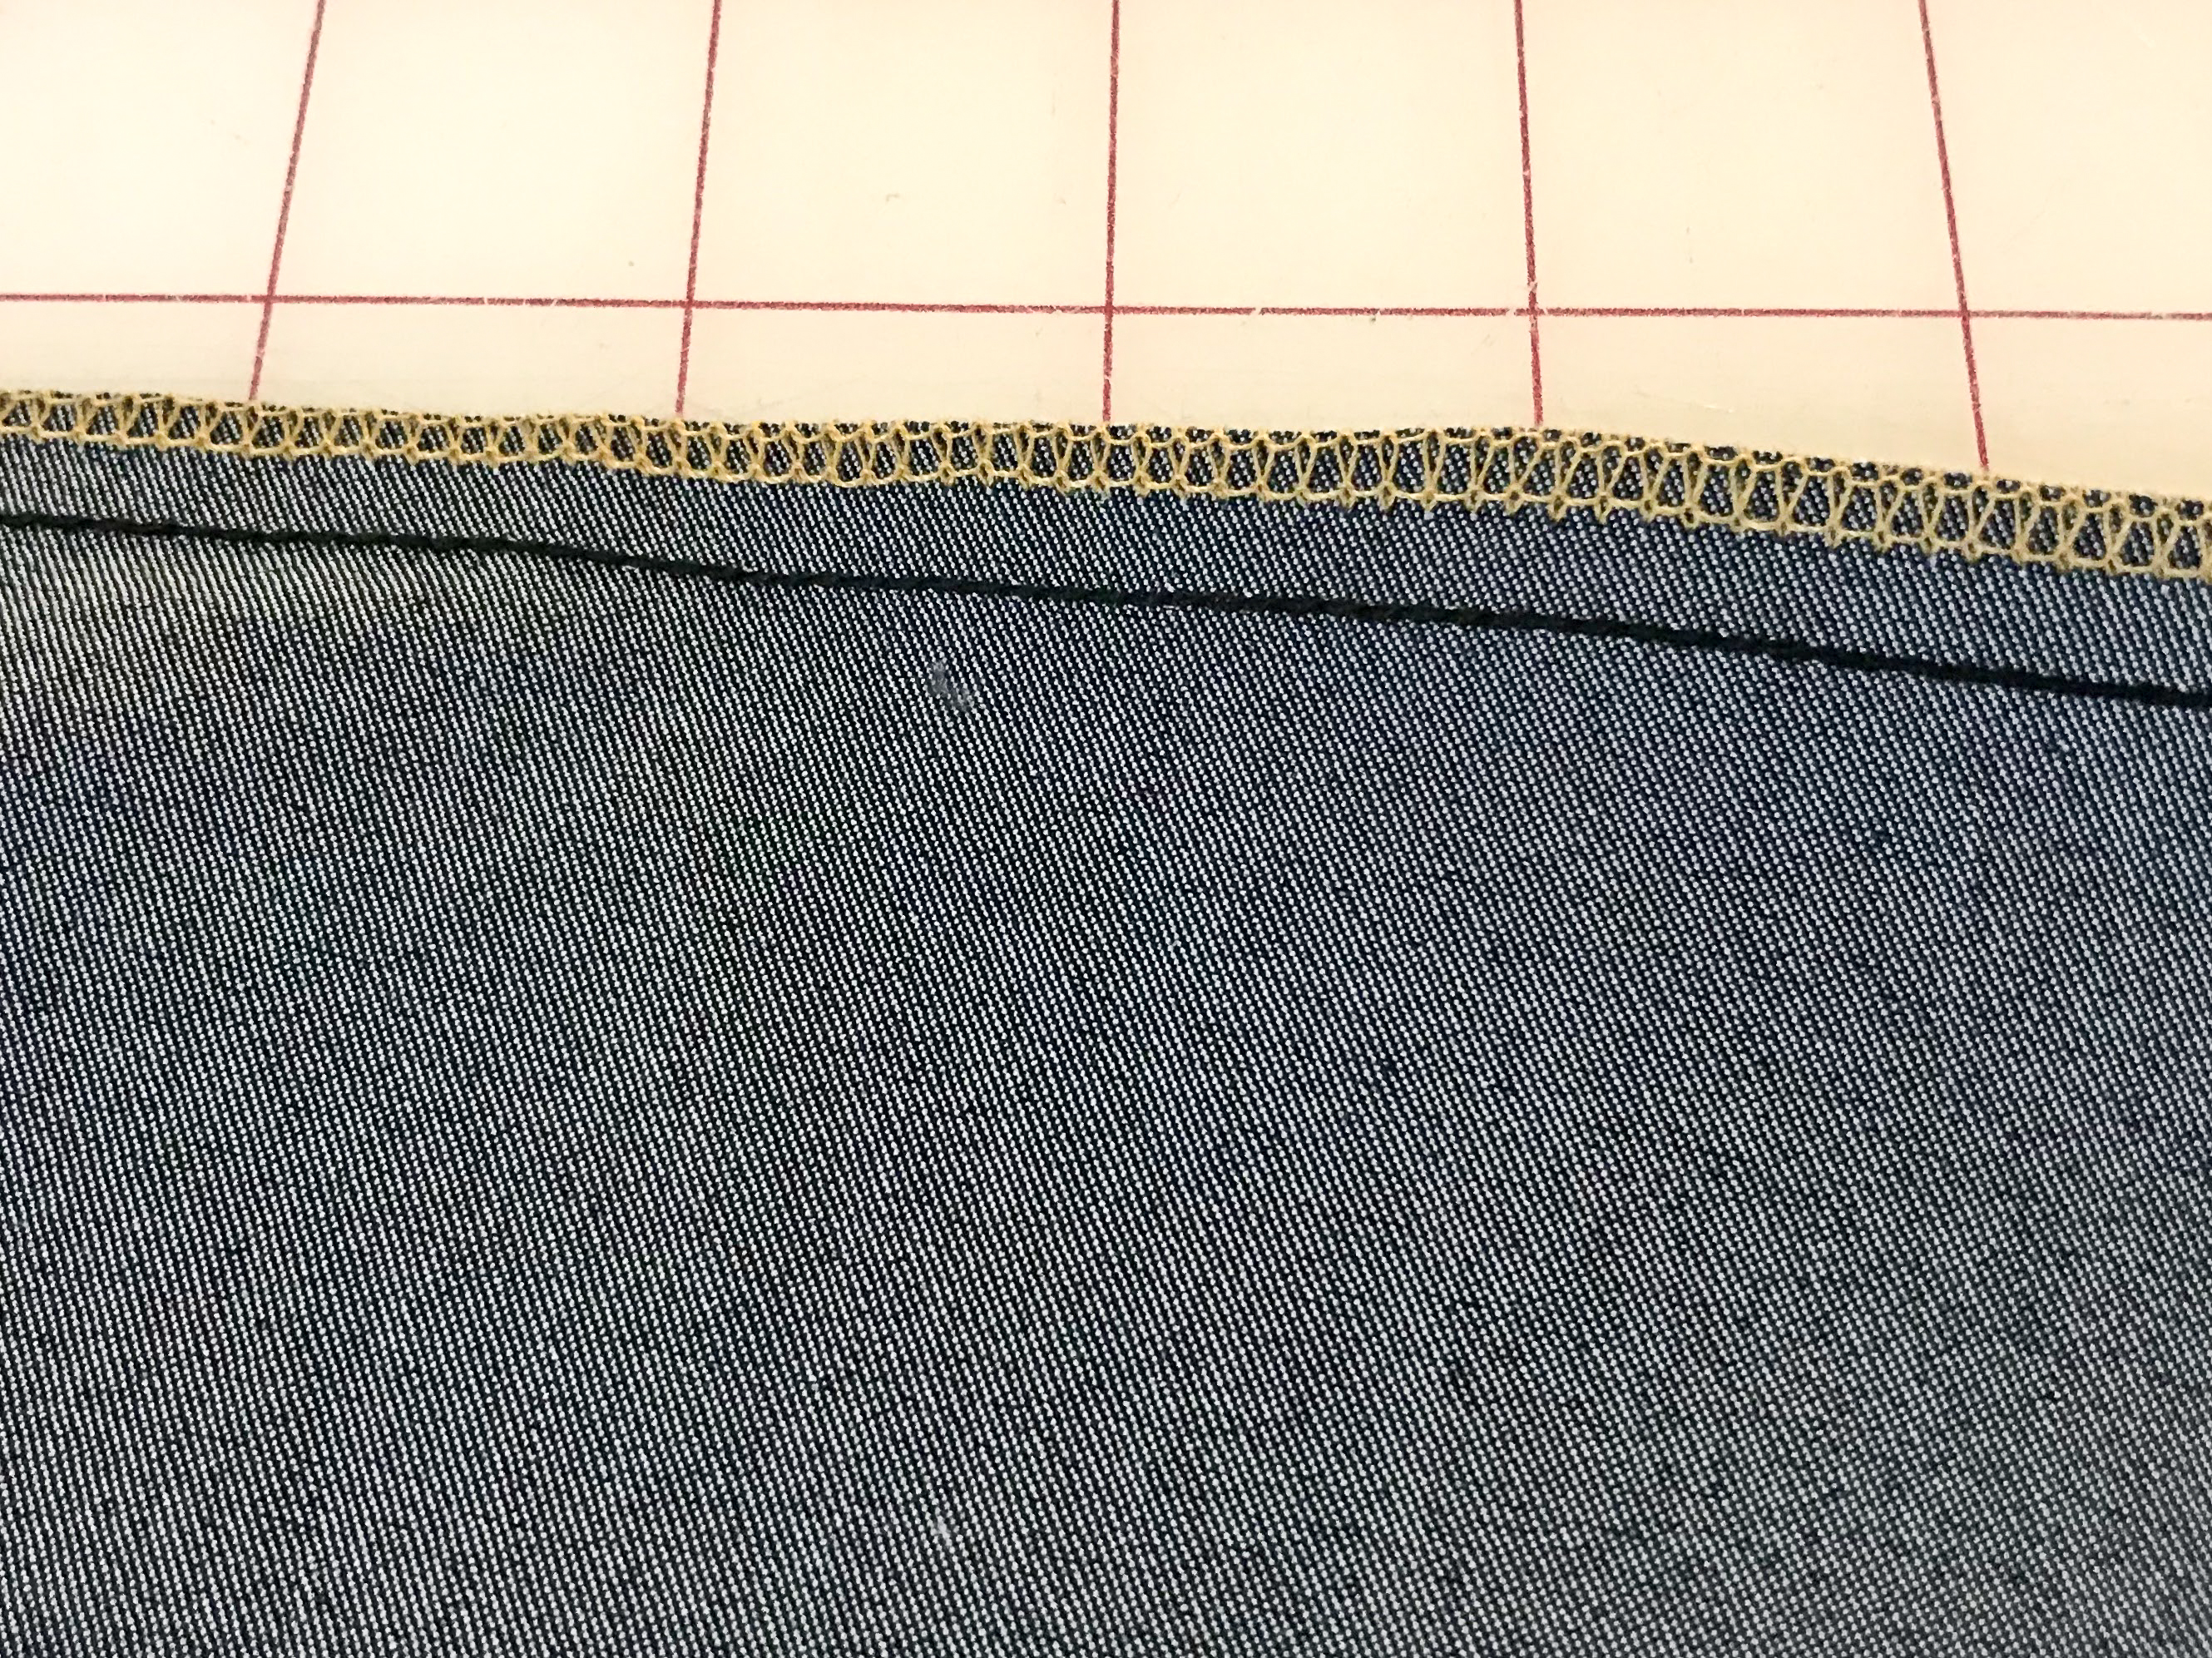 How to Sew Jeans with a 3-Thread Overlock + Chain Stitch Tutorial 1200 x 800 BERNINA WeAllSew Blog - Erica Bunker DIY Style